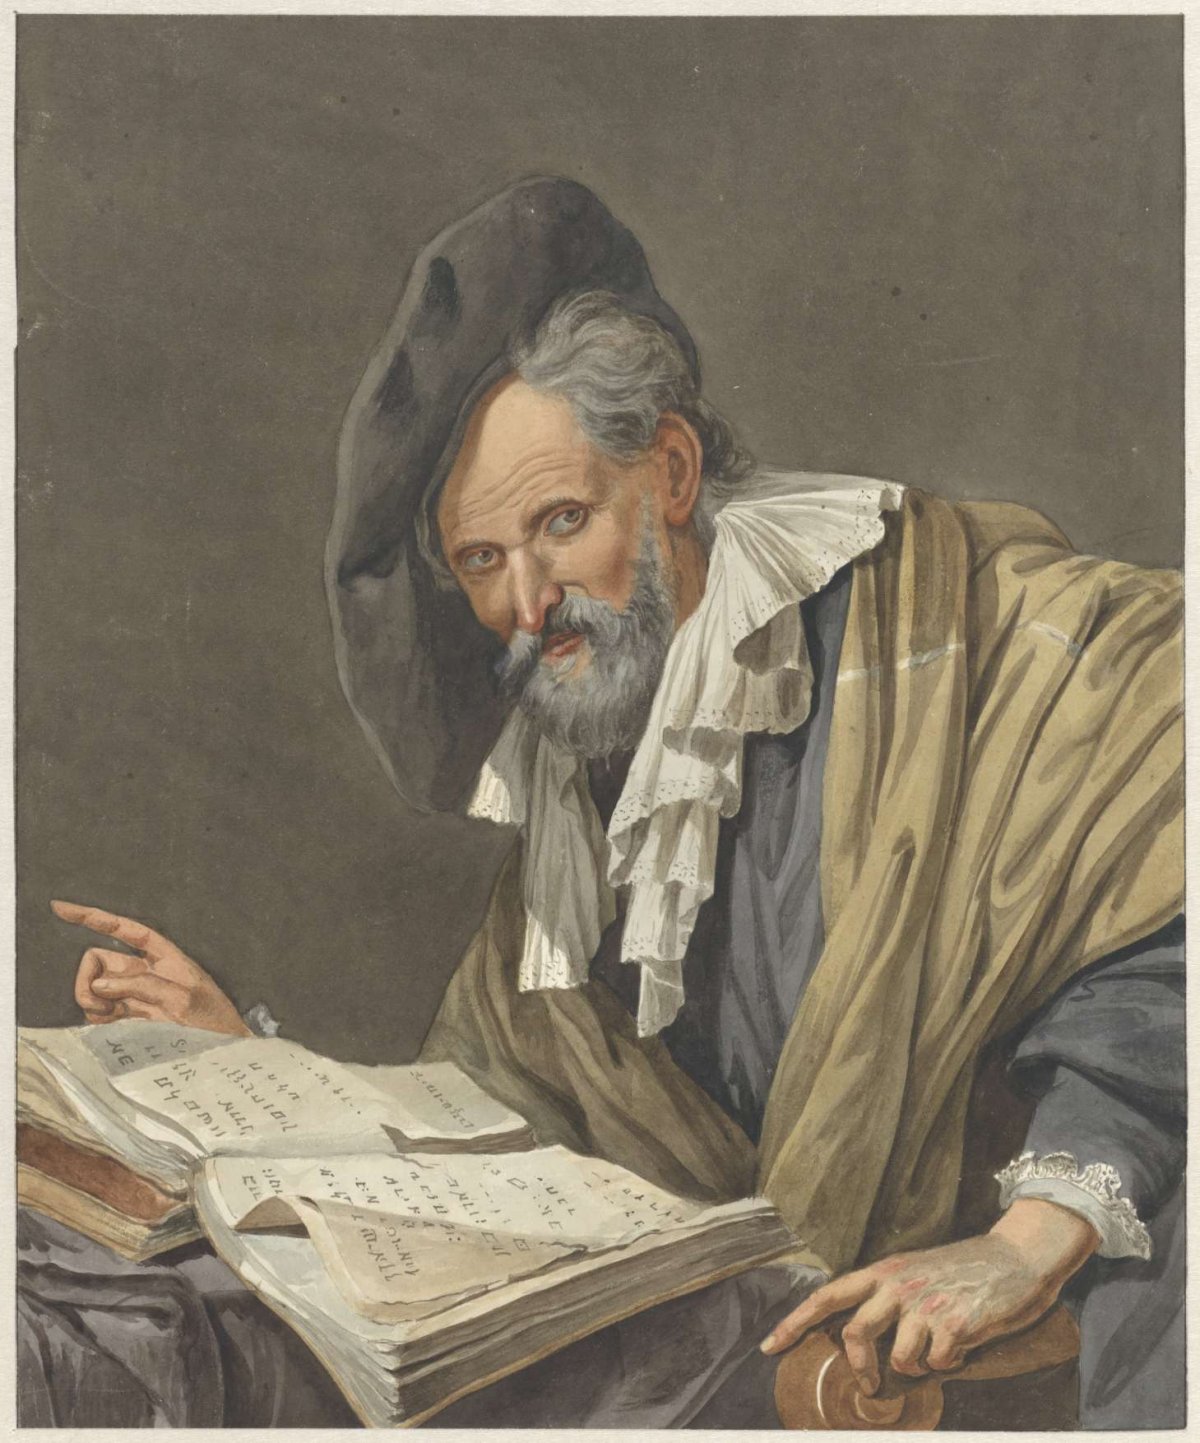 Man with beret and a book, R.M. Pruysenaar, 1798